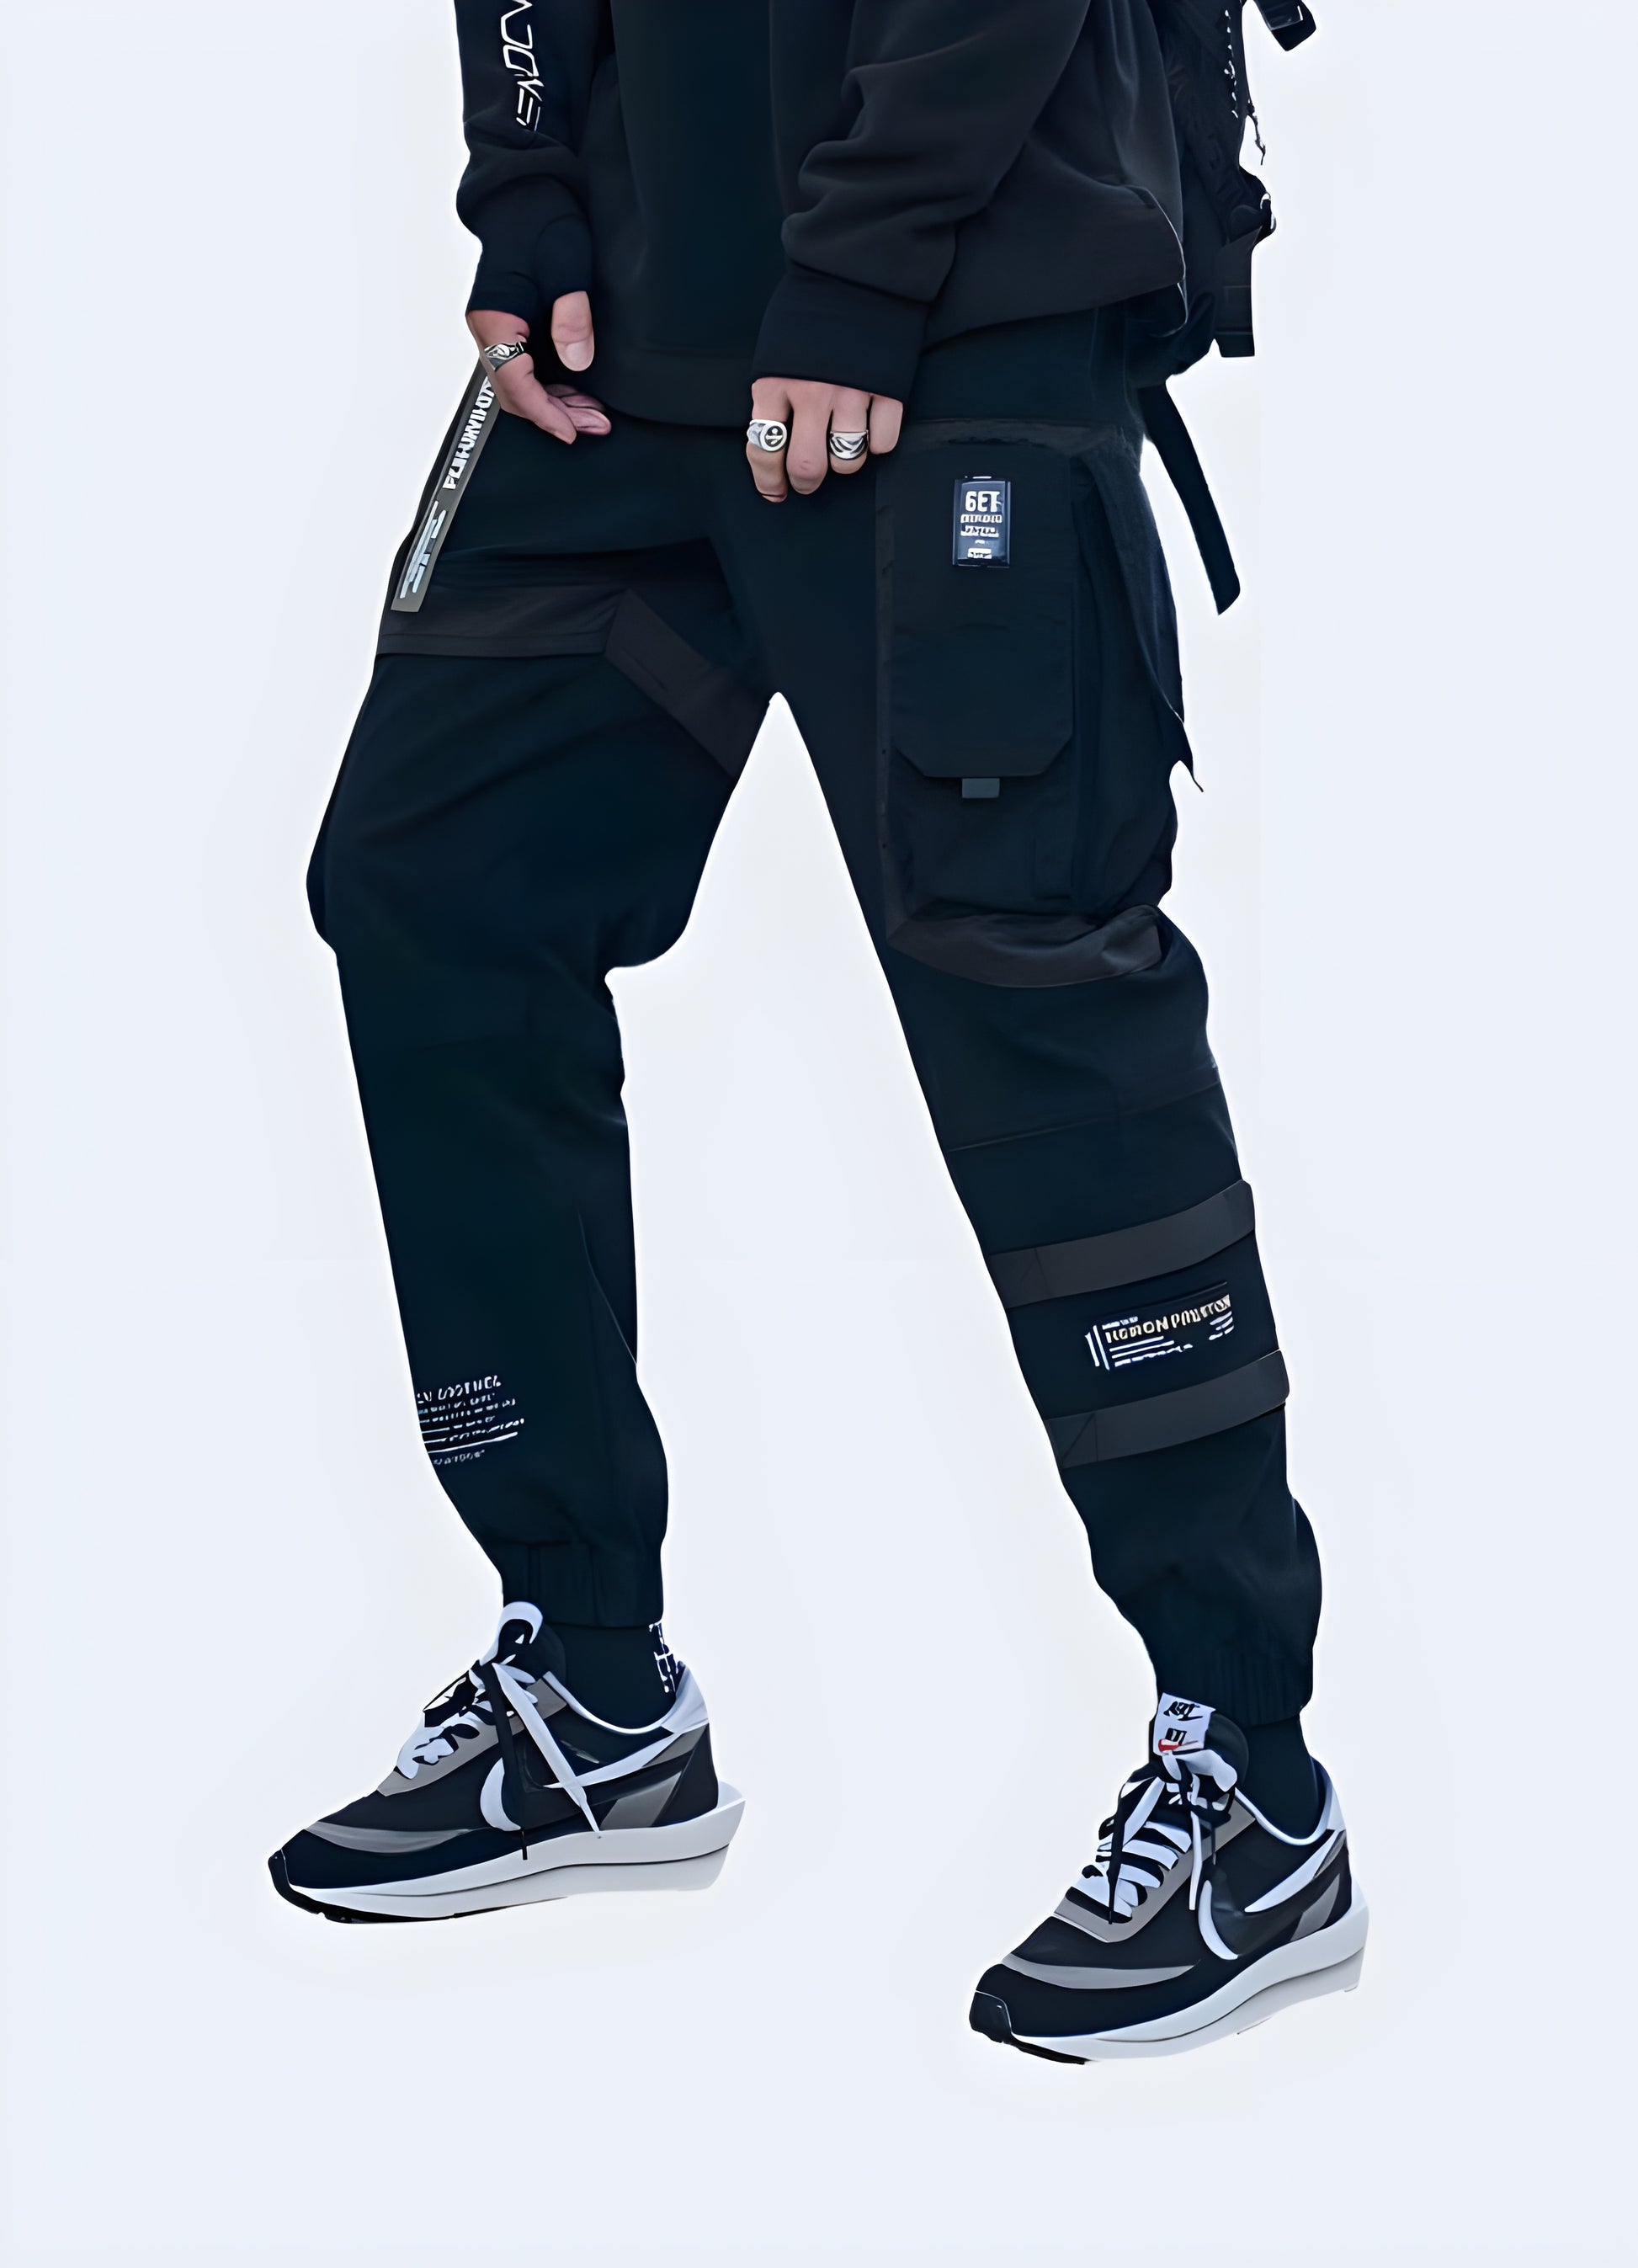 Soft and brushed baggy techwear pants.